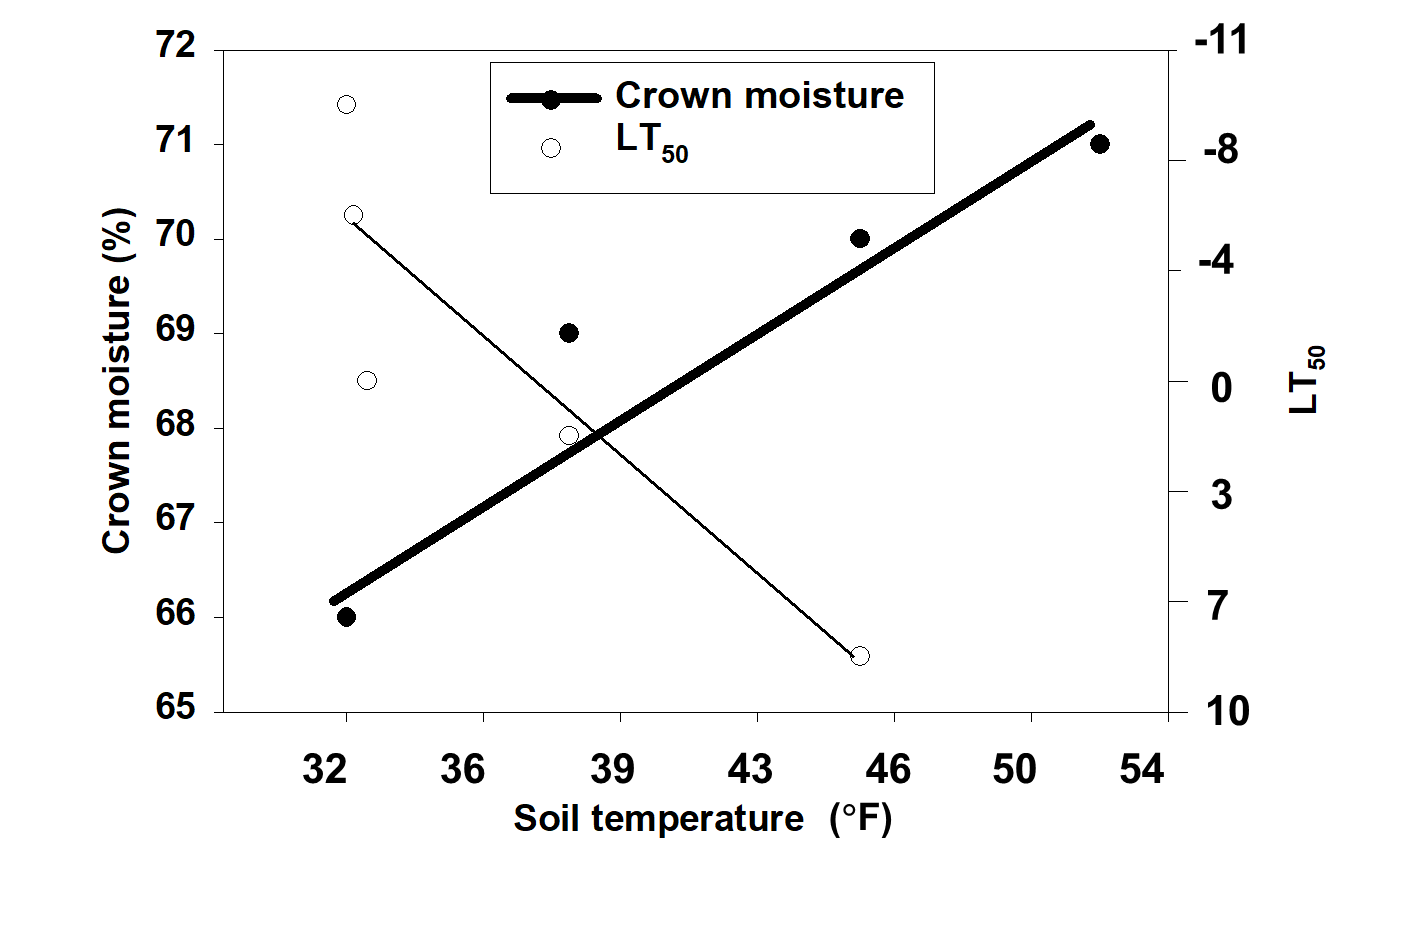 Figure 3. Relationship between crown moisture and LT50 temperature during deacclimation in early spring on annual bluegrass (from Tompkins et al., 2000). 